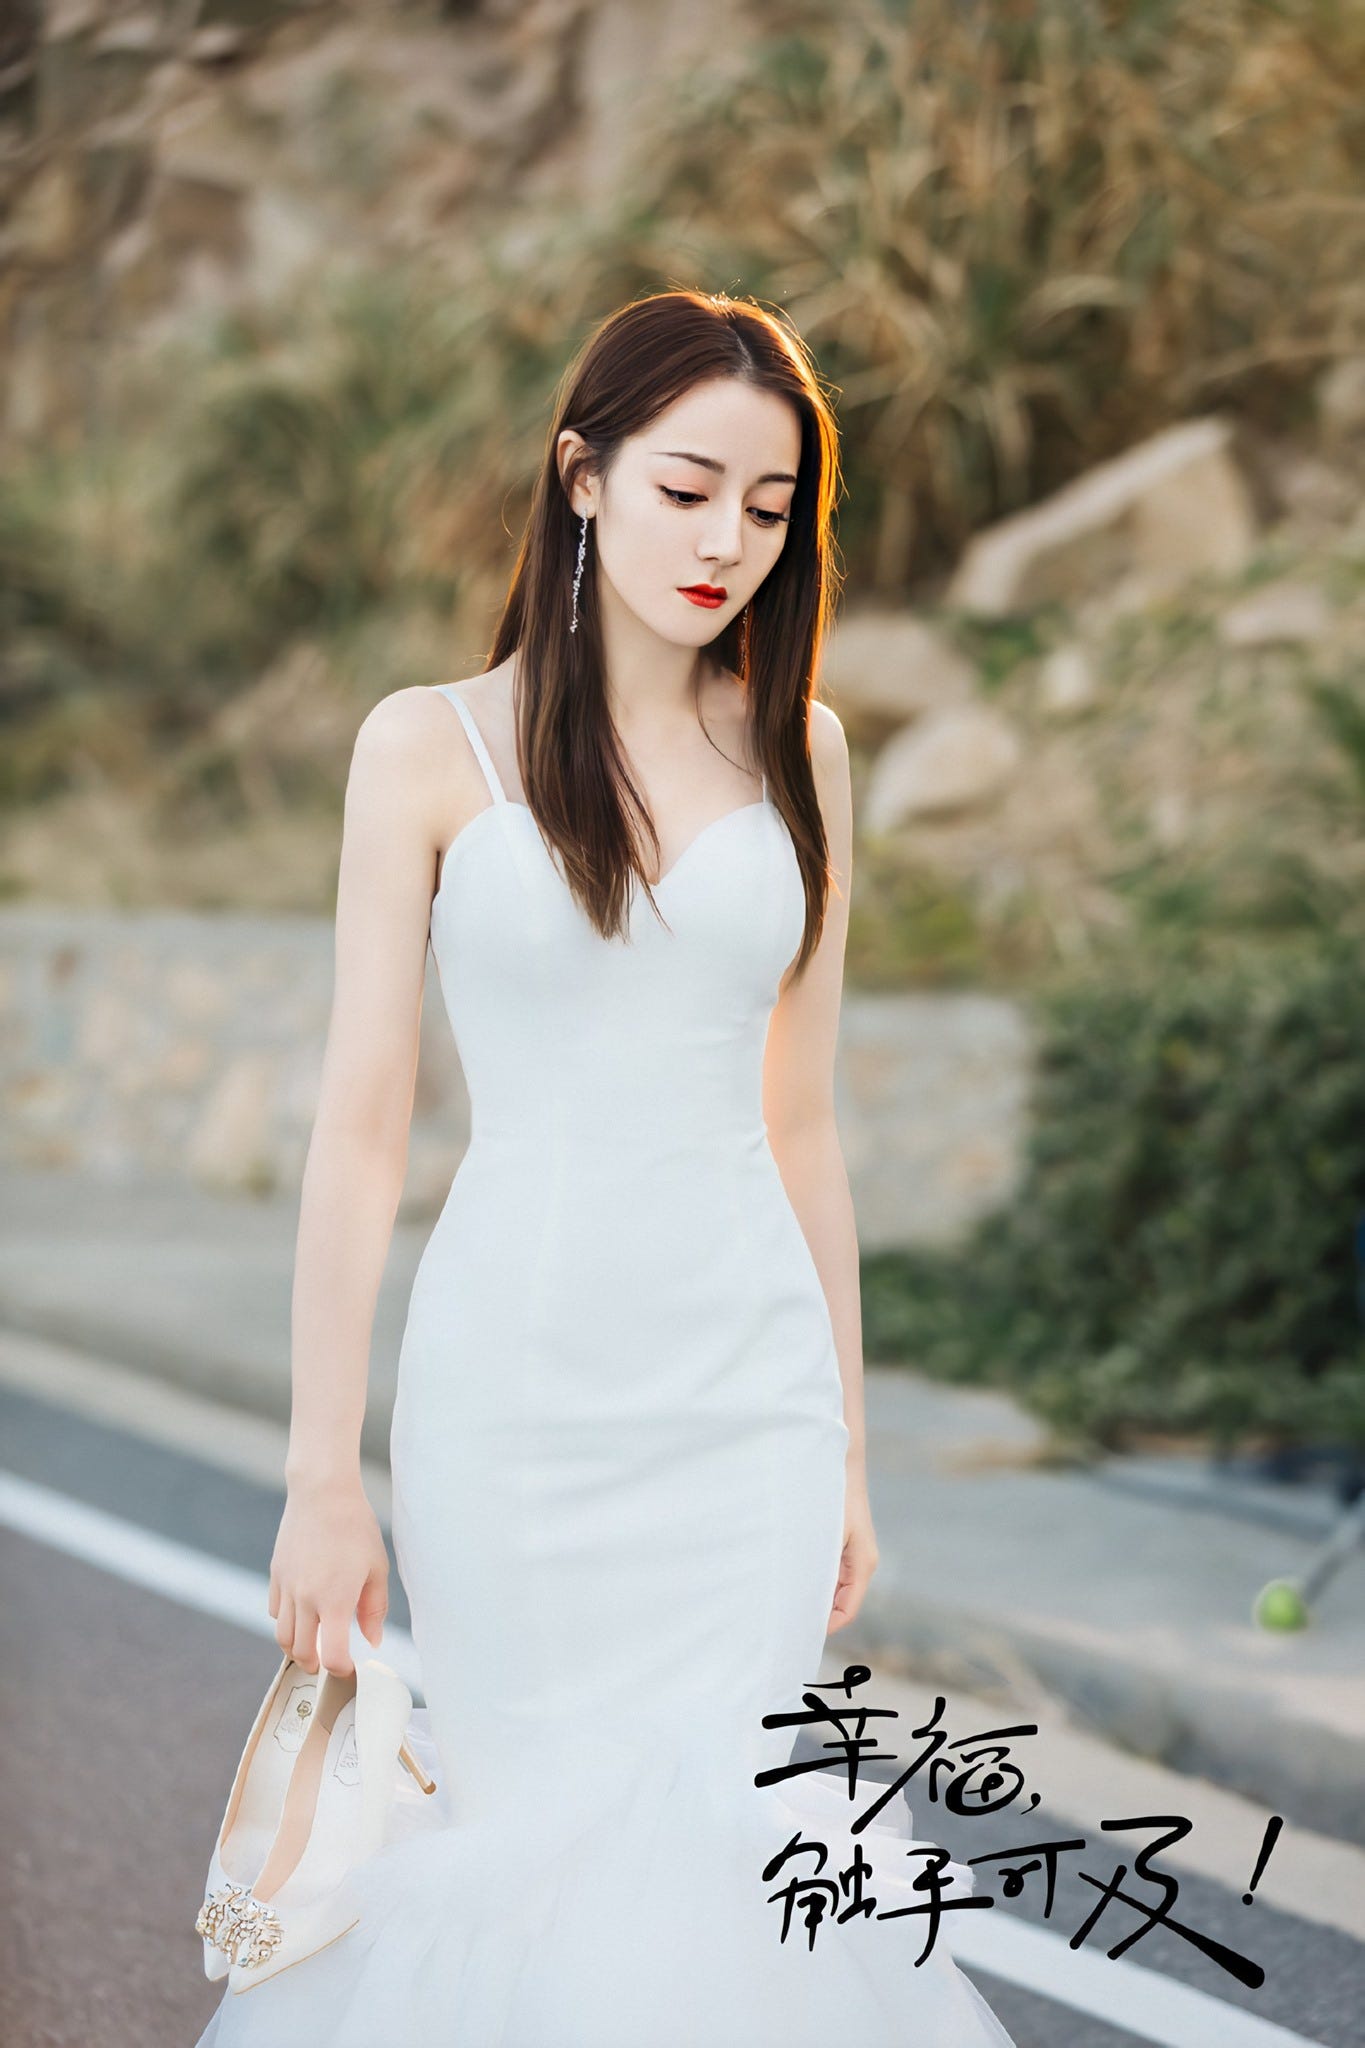 HAPPINESS IN THE HANDS - Dilraba Dilmurat creates a pure white wedding dres...